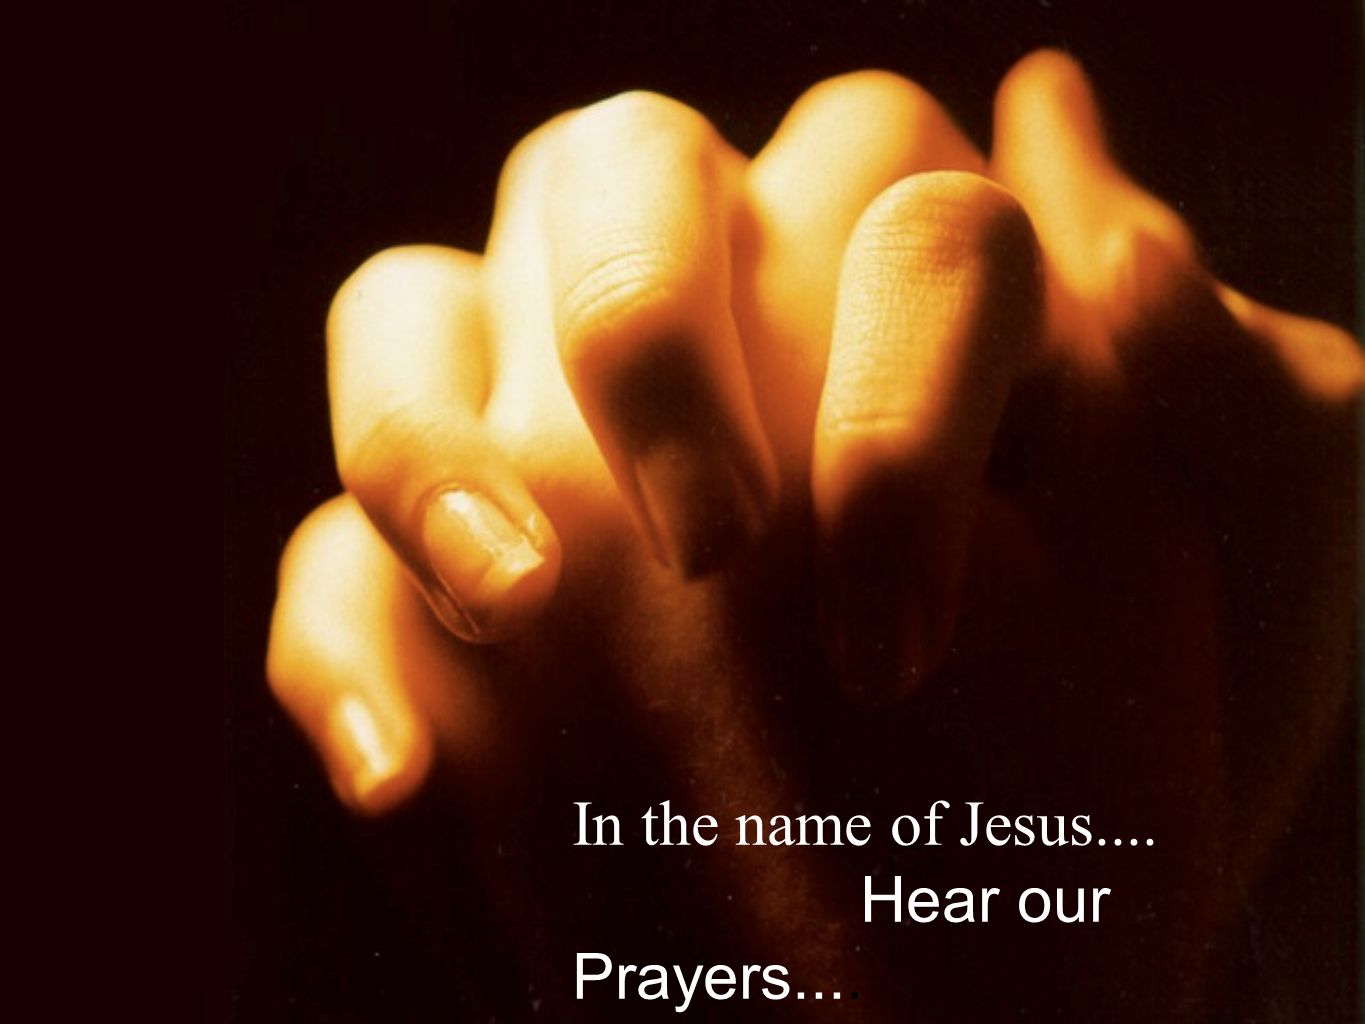 In the name of Jesus.... Hear our Prayers....